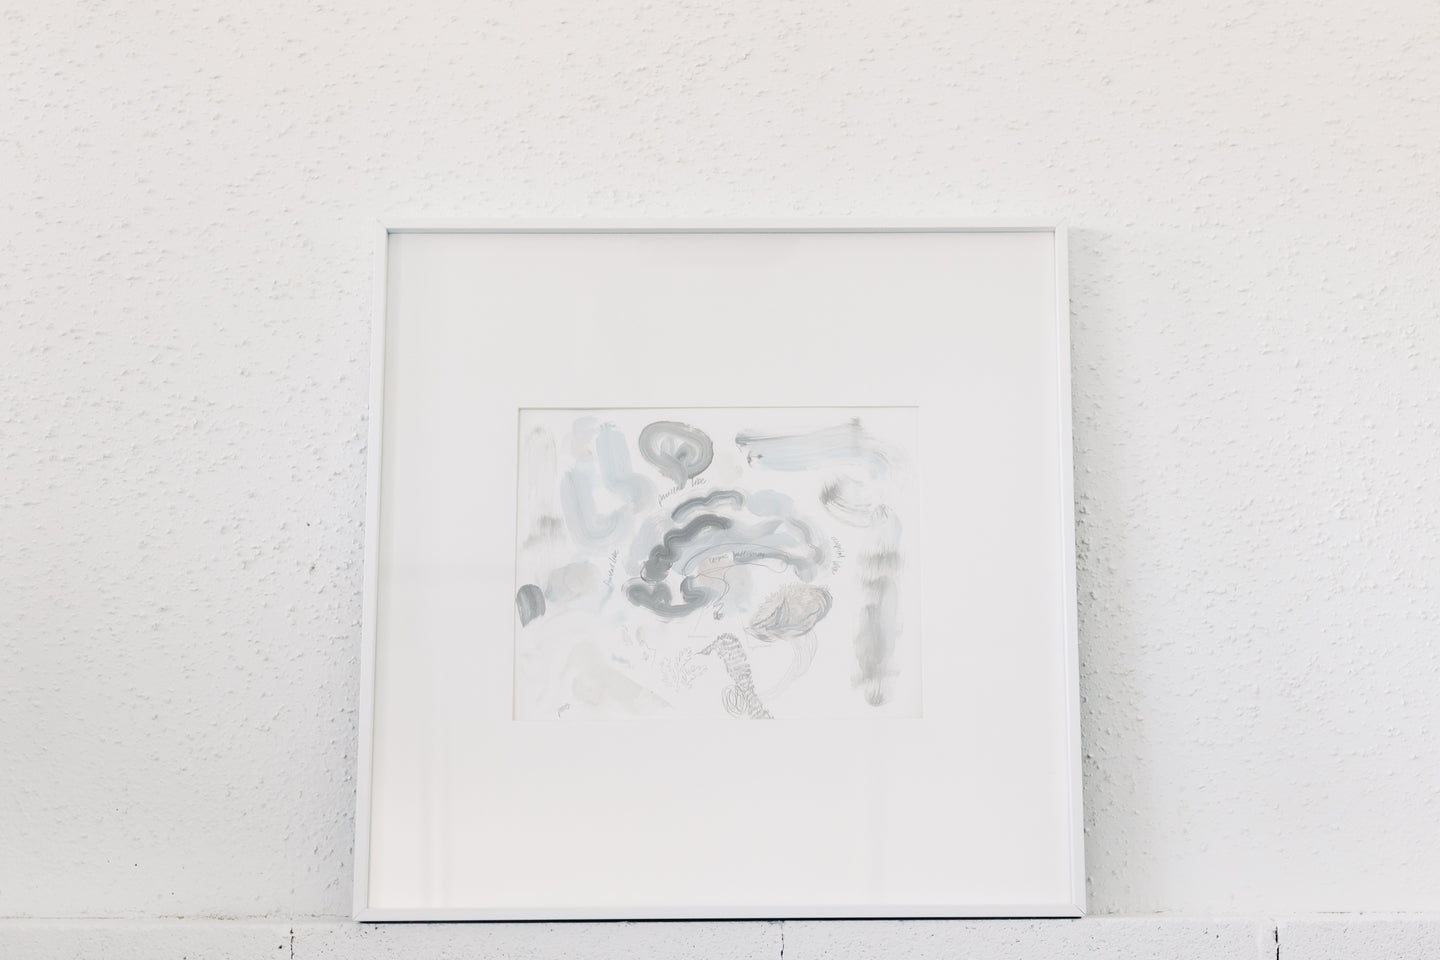 Image of framed and matted mixed media abstract brain artwork